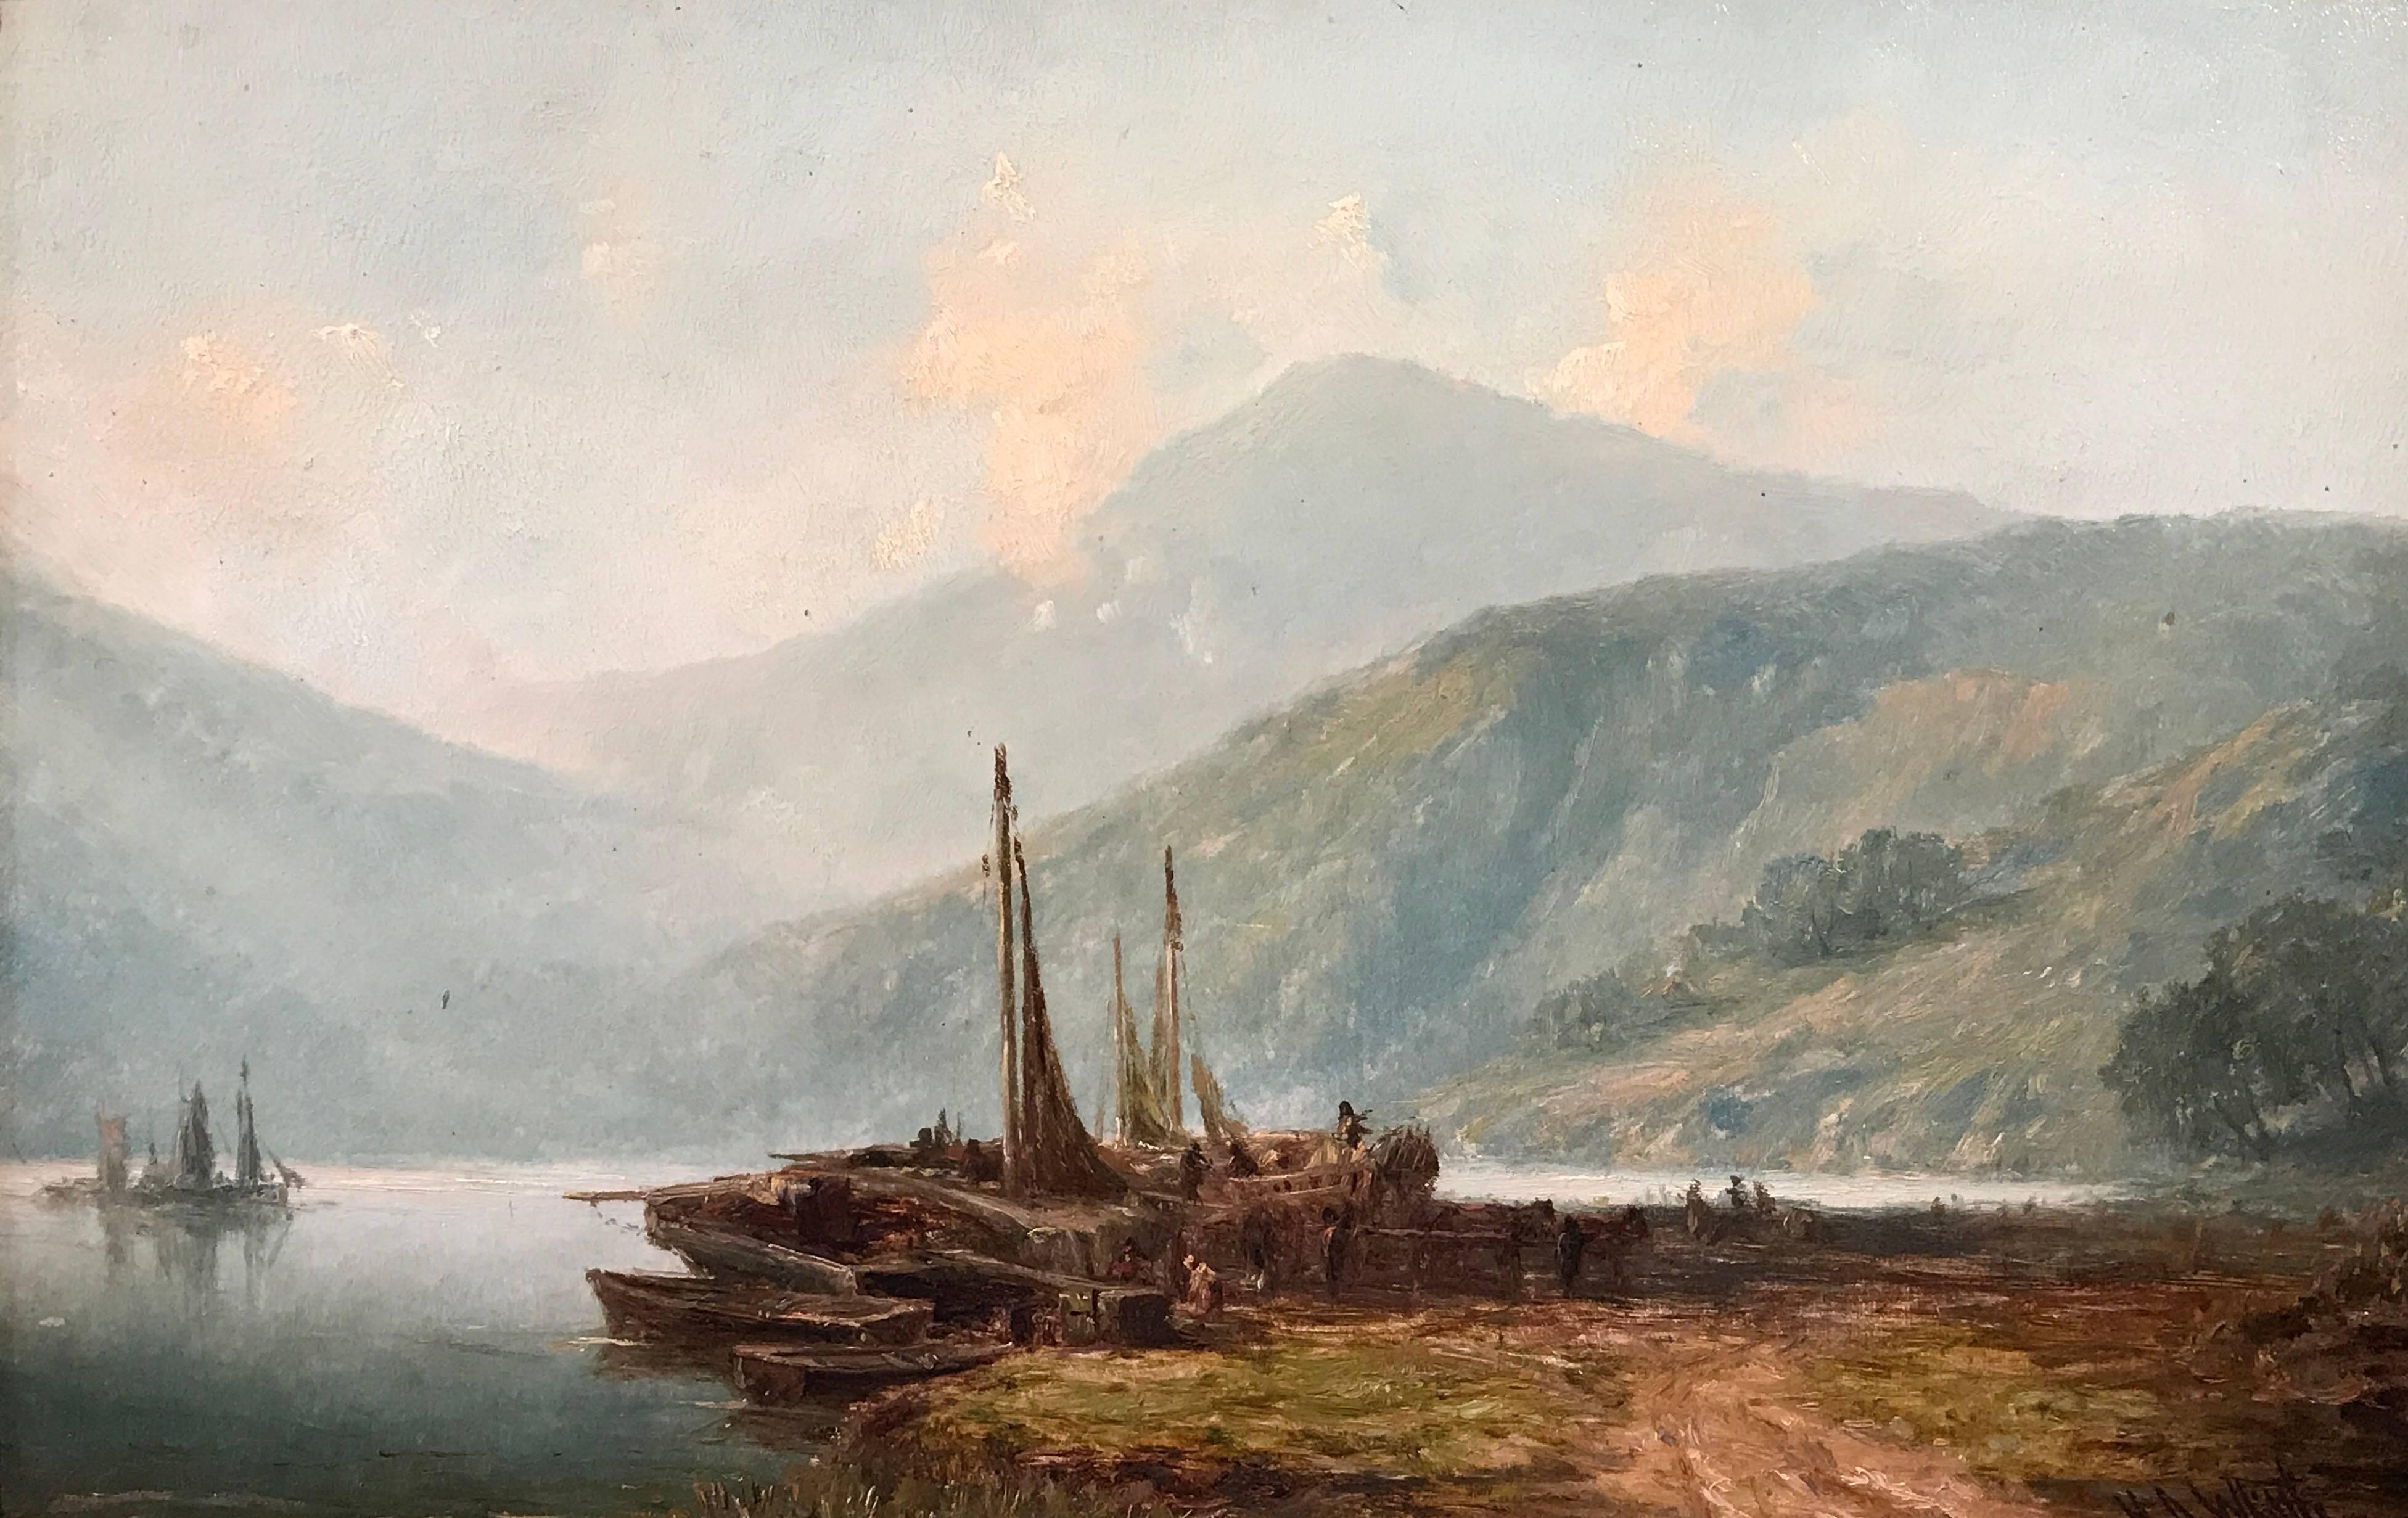 Harry Armstrong Whittle Landscape Painting - Loch Lomond Scotland Fishing Boats 19th Century Oil Painting